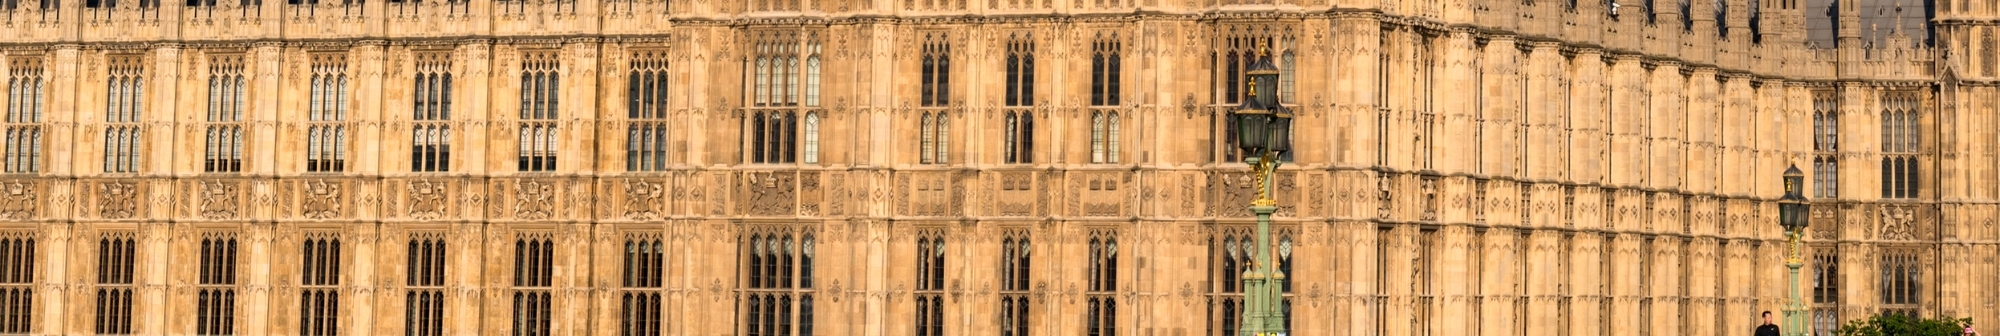 exterior-of-houses-of-parliament